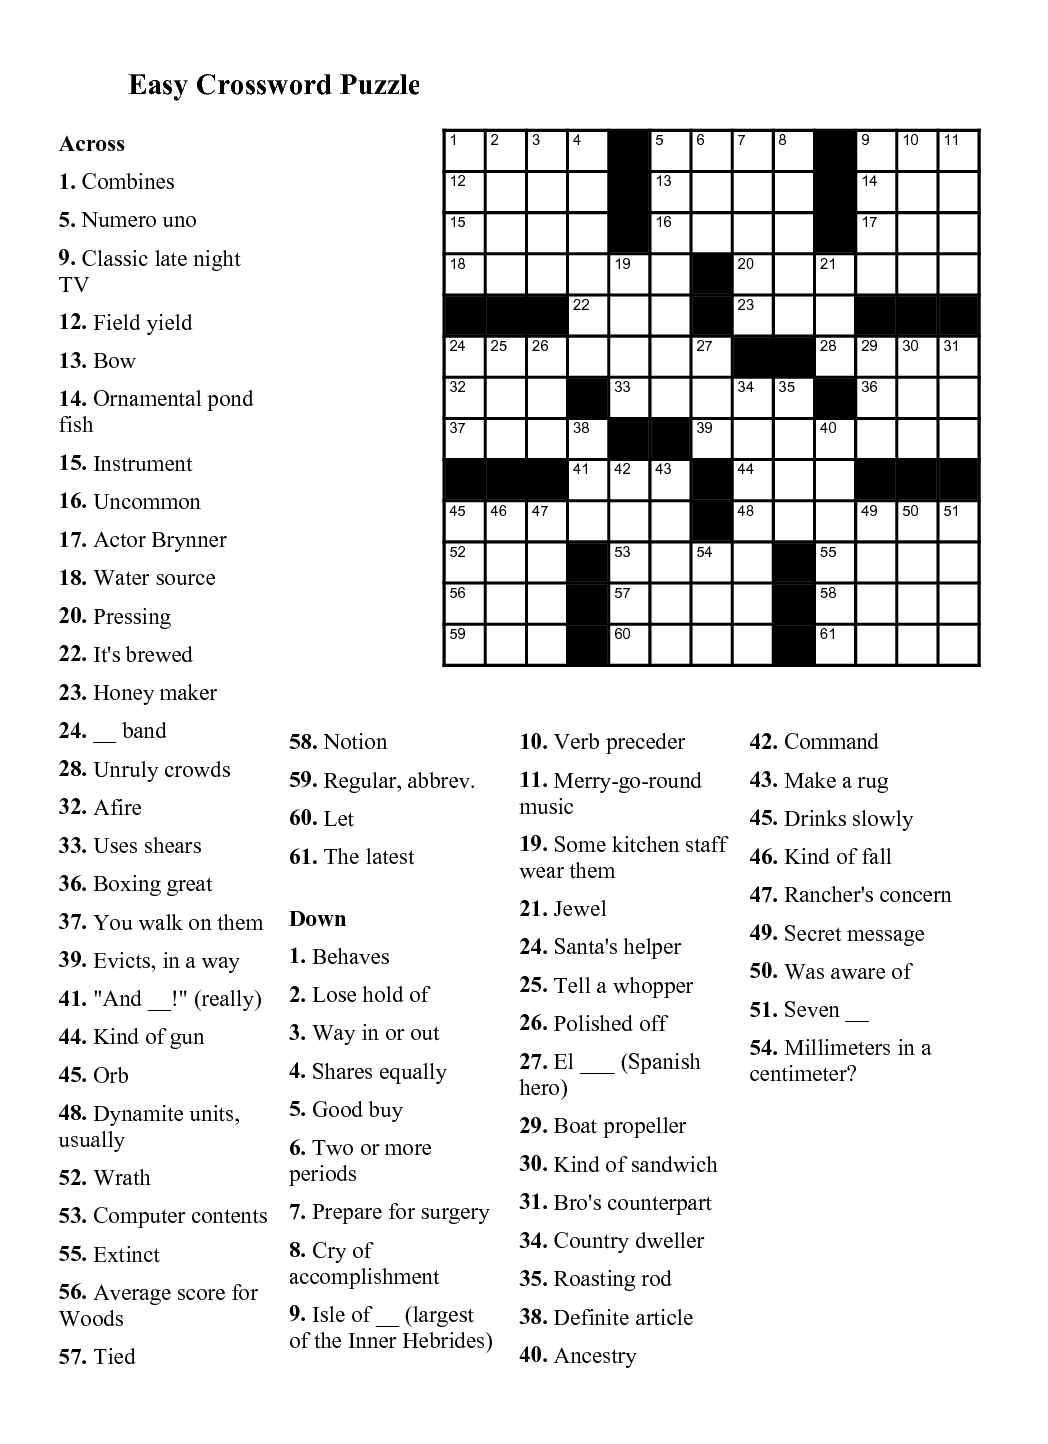 Easy Crossword Puzzles Printable Daily Template - Free Easy Crossword Puzzles Printable